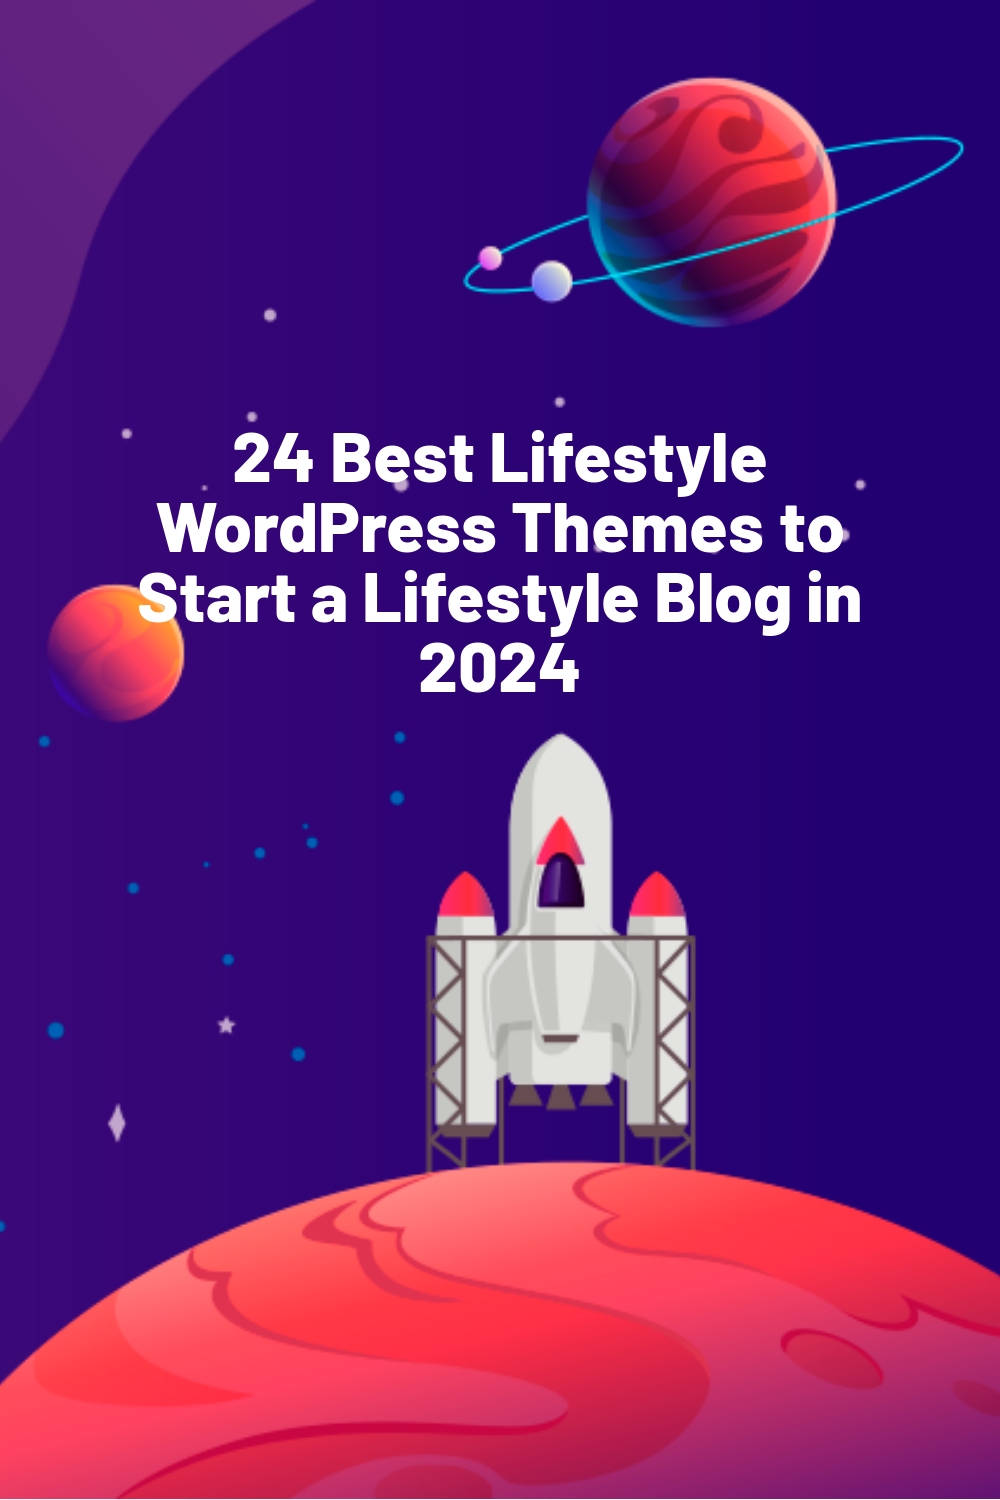 24 Best Lifestyle WordPress Themes to Start a Lifestyle Blog in 2024